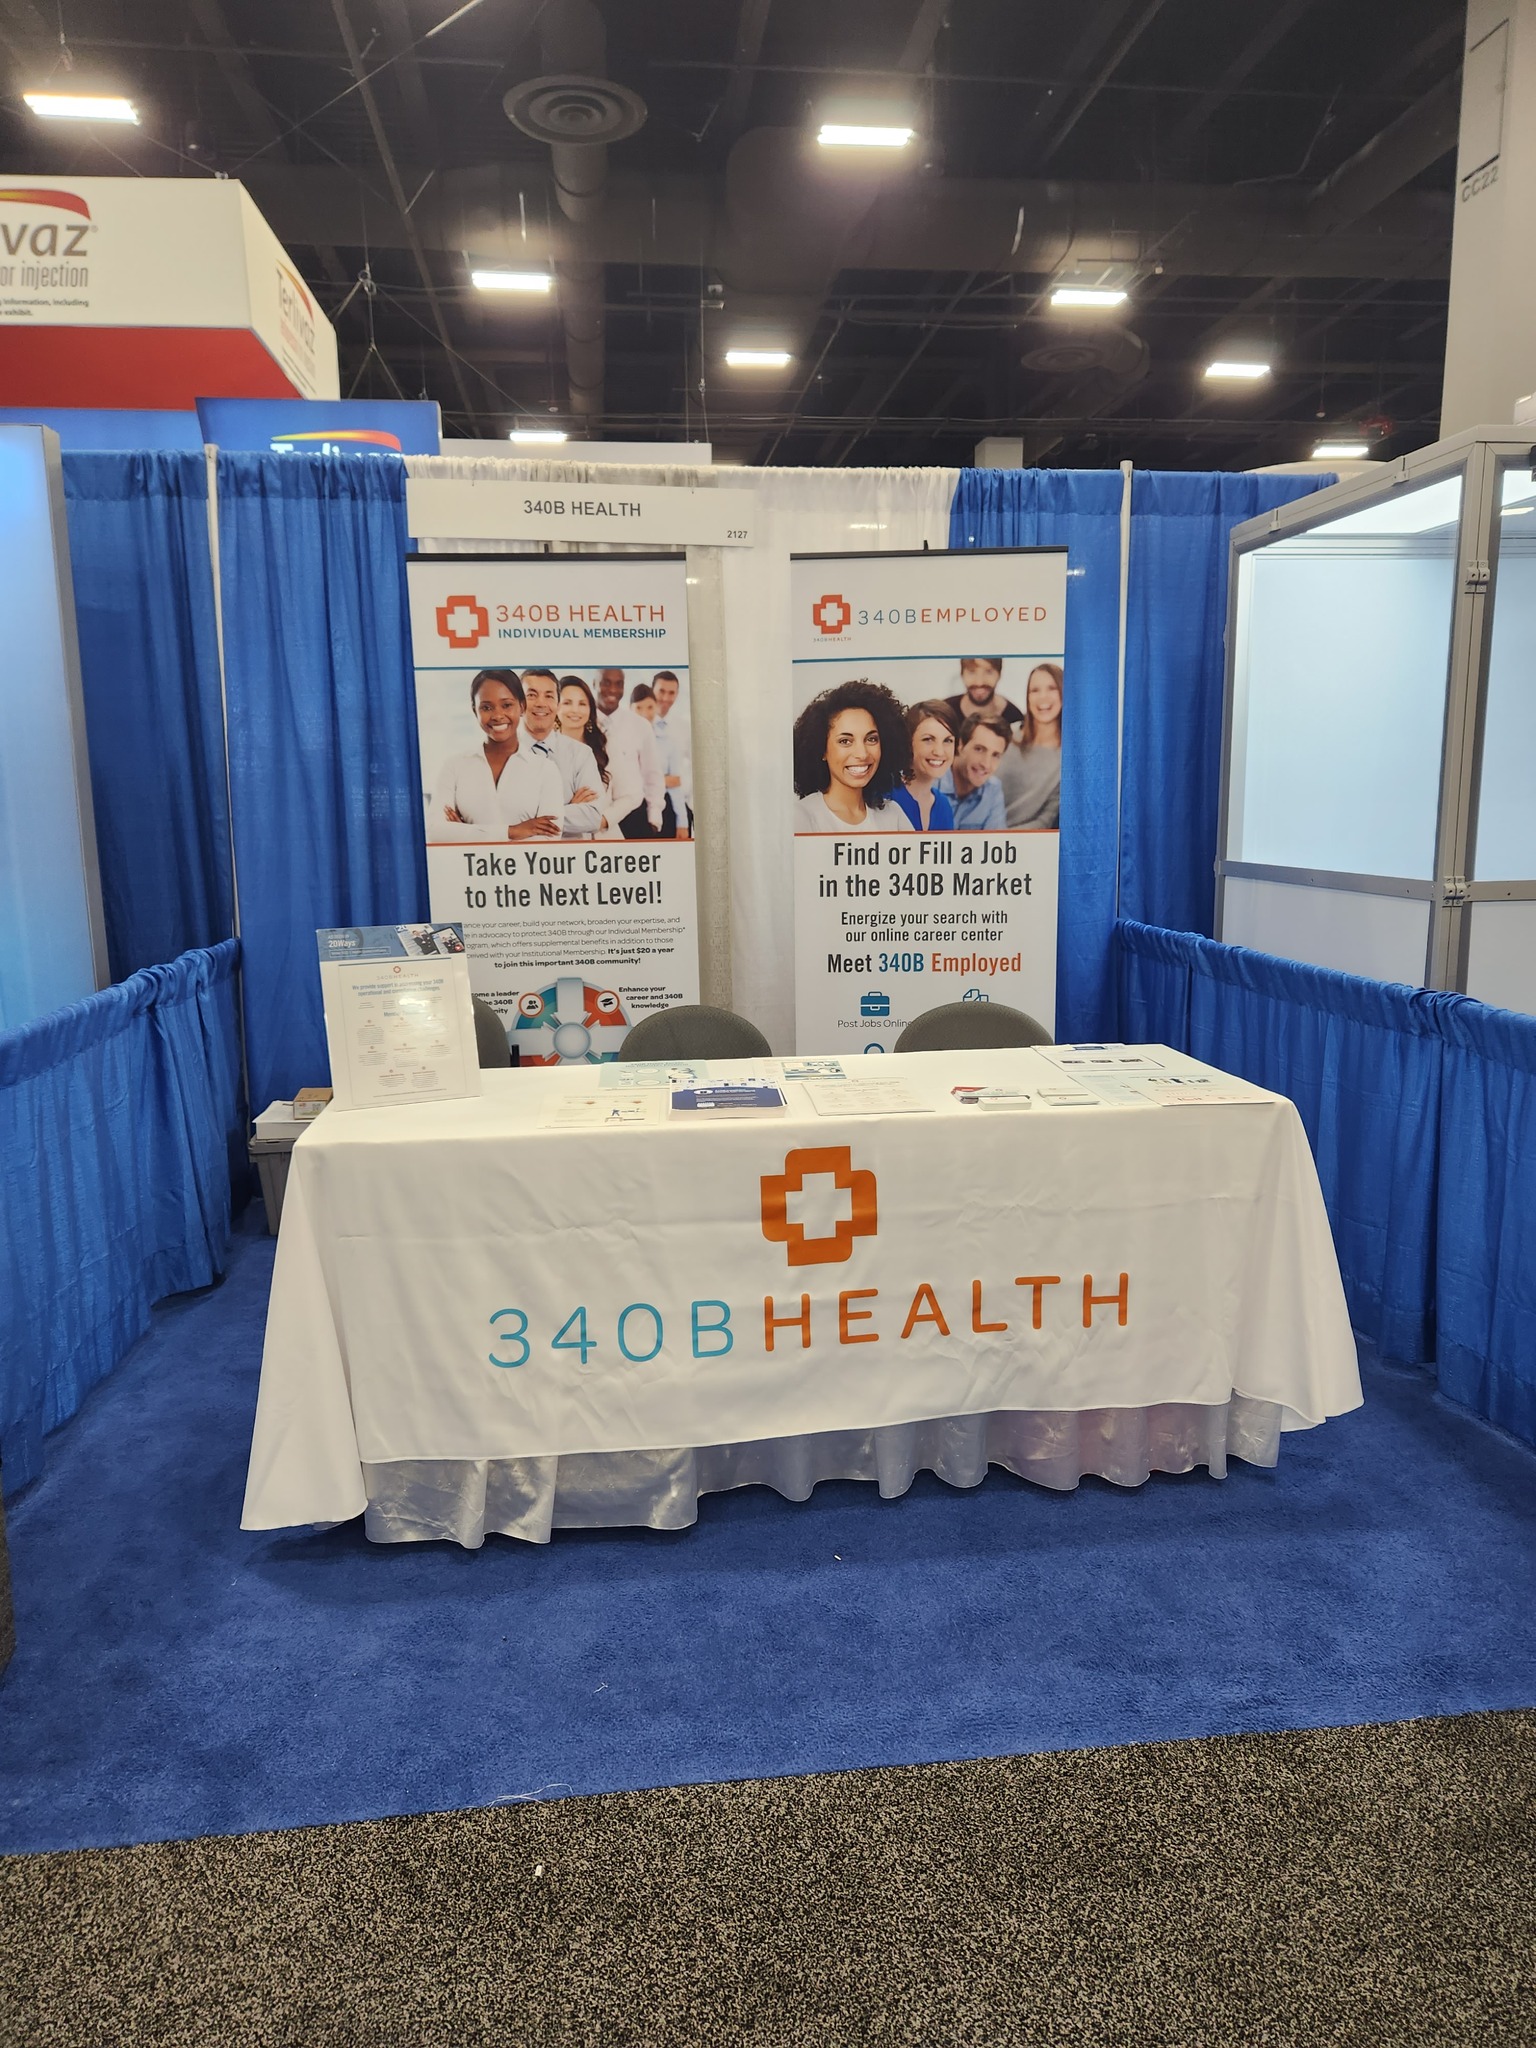 RXinsider Must See Booths ASHP Midyear Clinical Meeting & Exhibition...